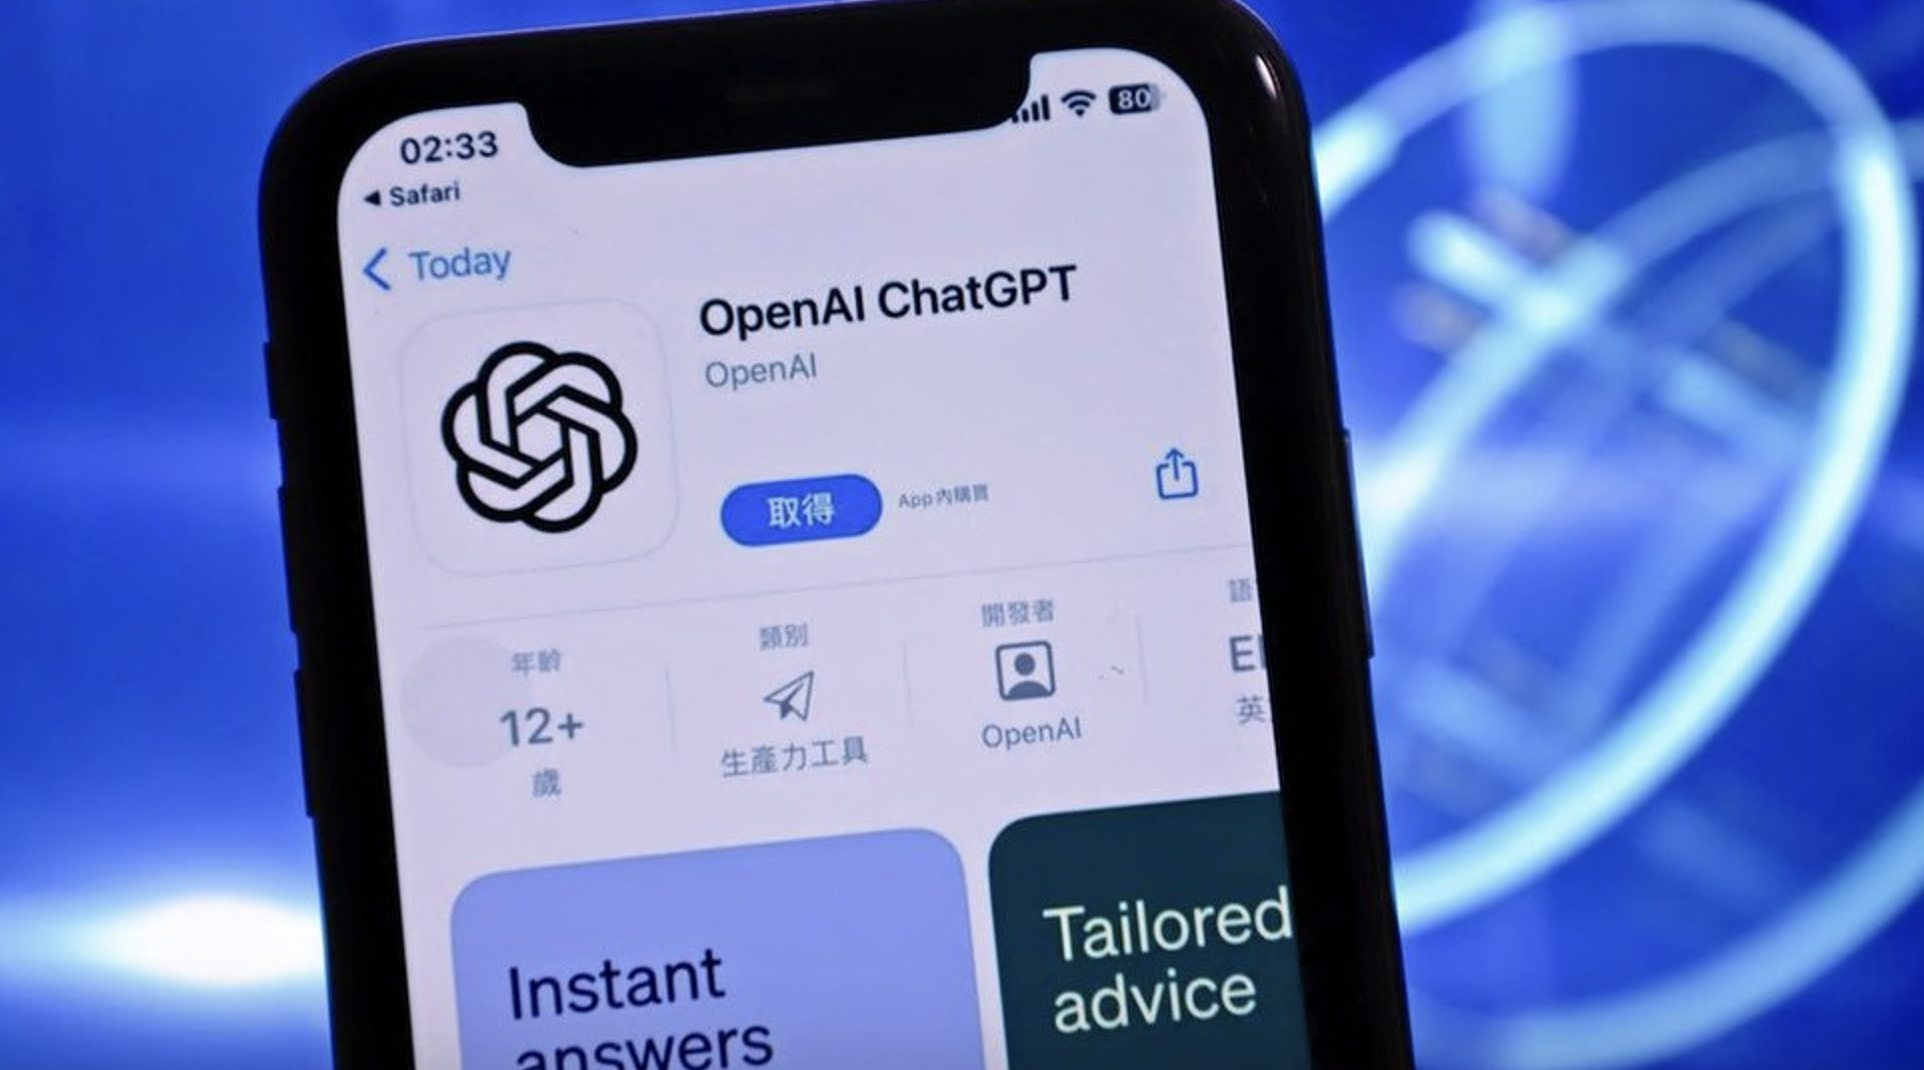 In this photo illustration, the ChatGPT app download interface for iOS is seen on 27 May 2023 in Shenzhen, Guangdong Province of China